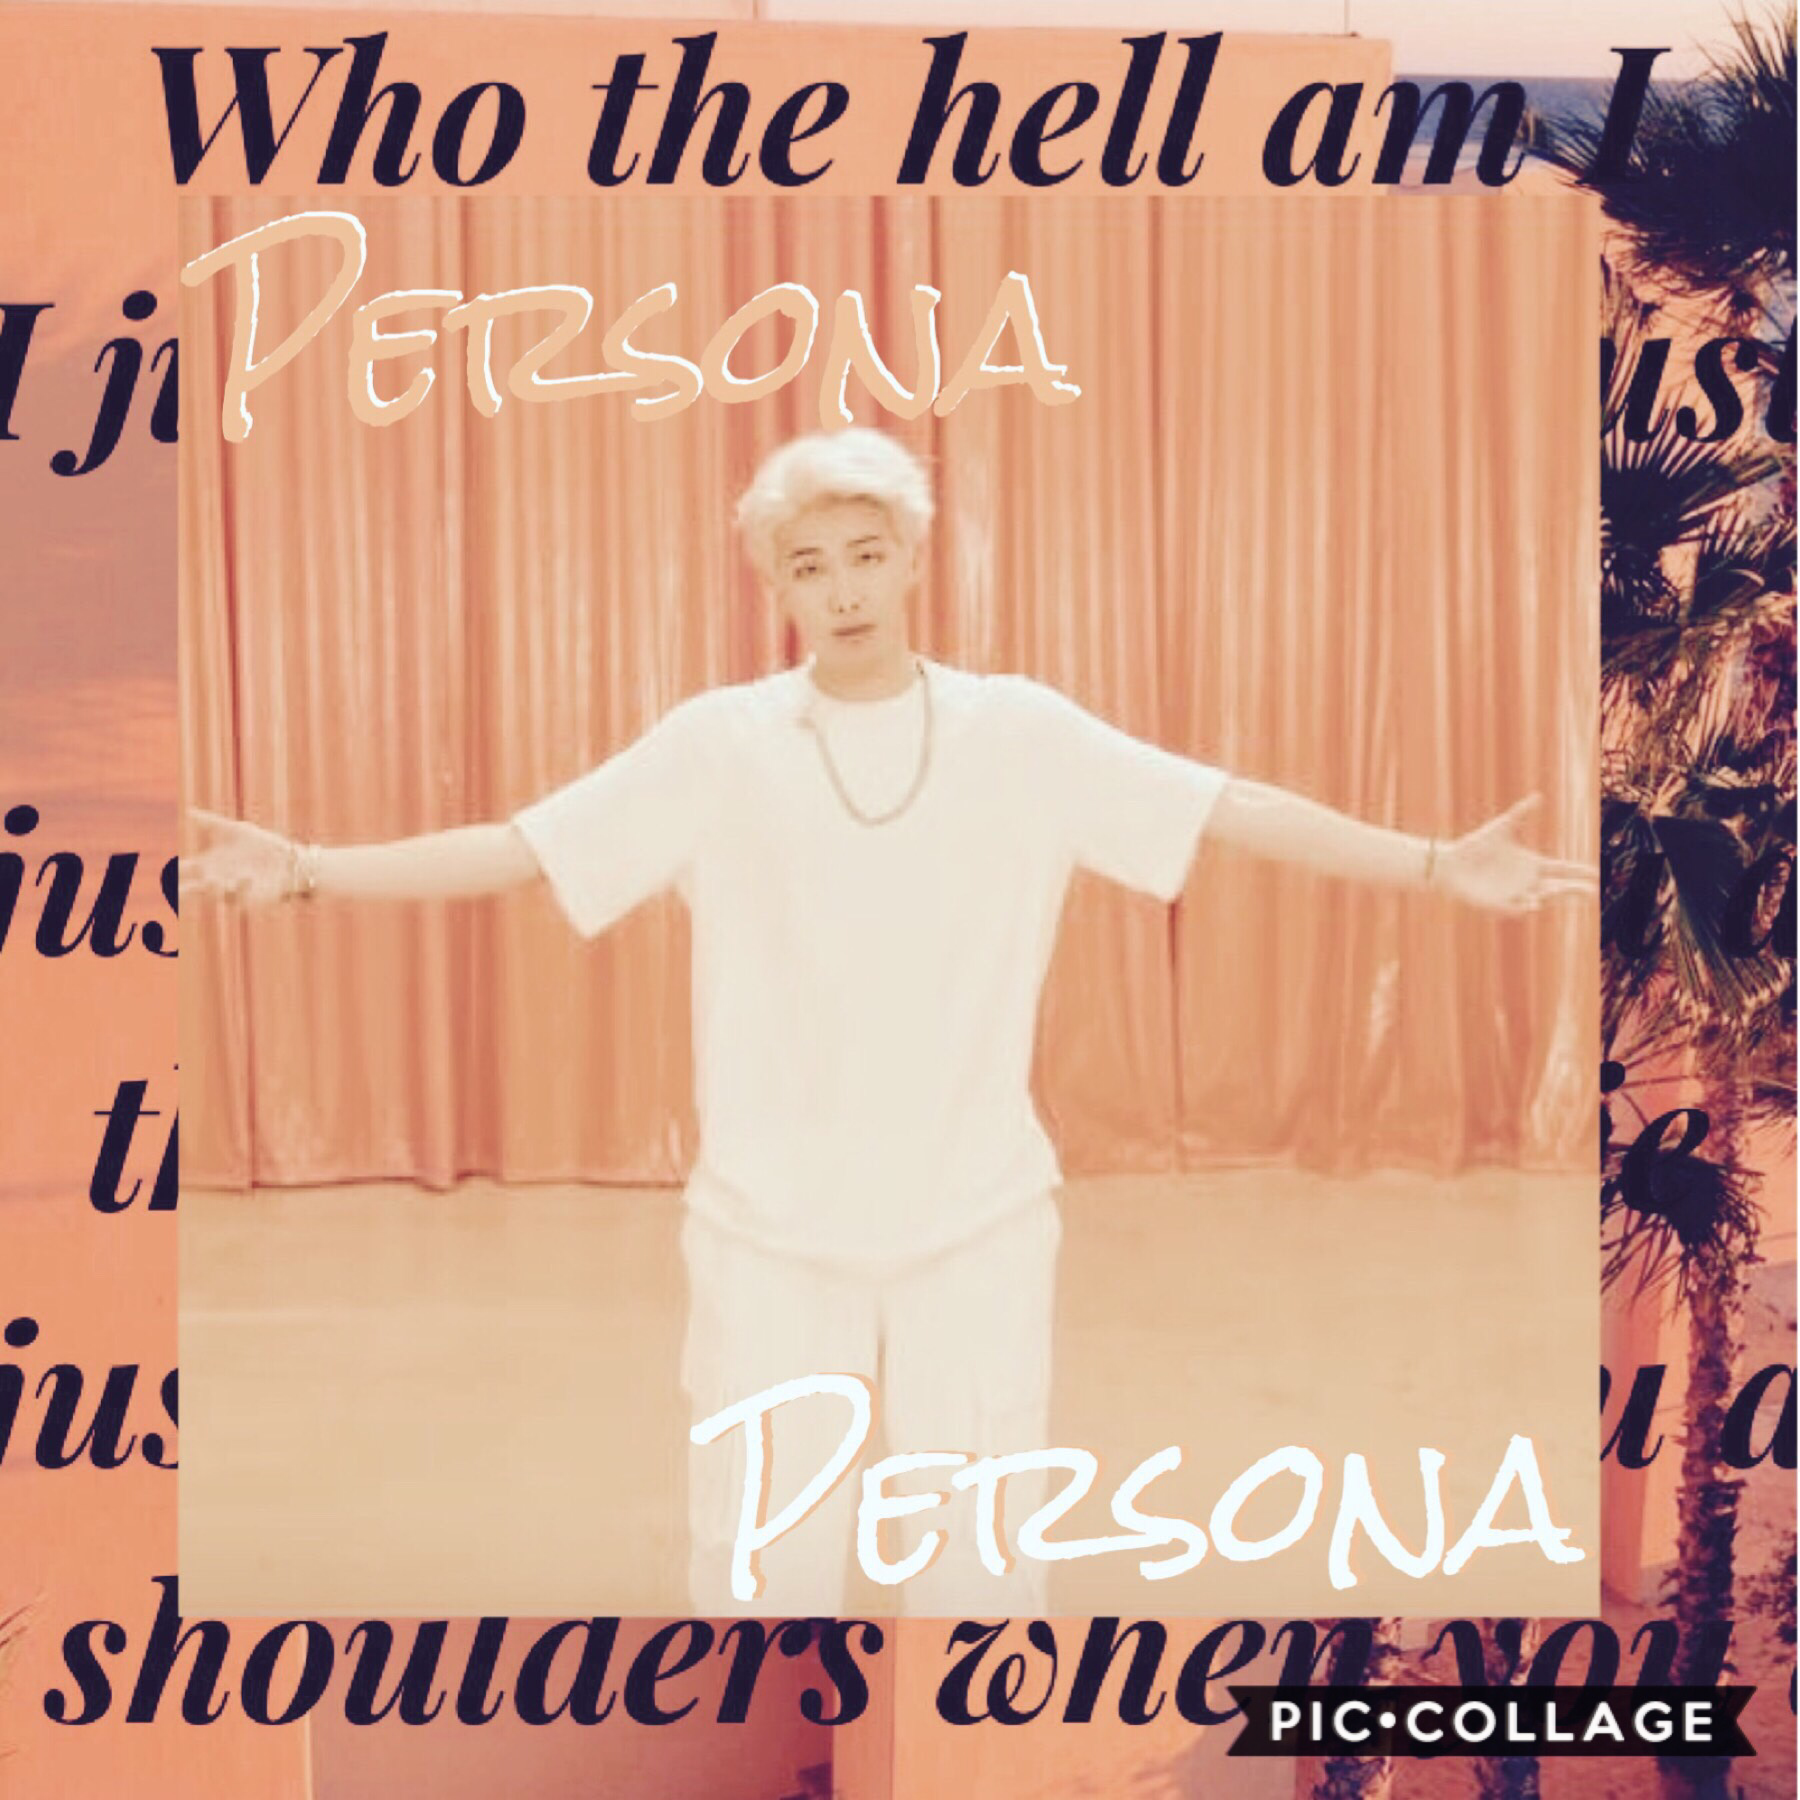 -Tap-

Hey guys 😁 I wanted to make a persona edit seeing as I haven’t been able to stop singing it since it came out